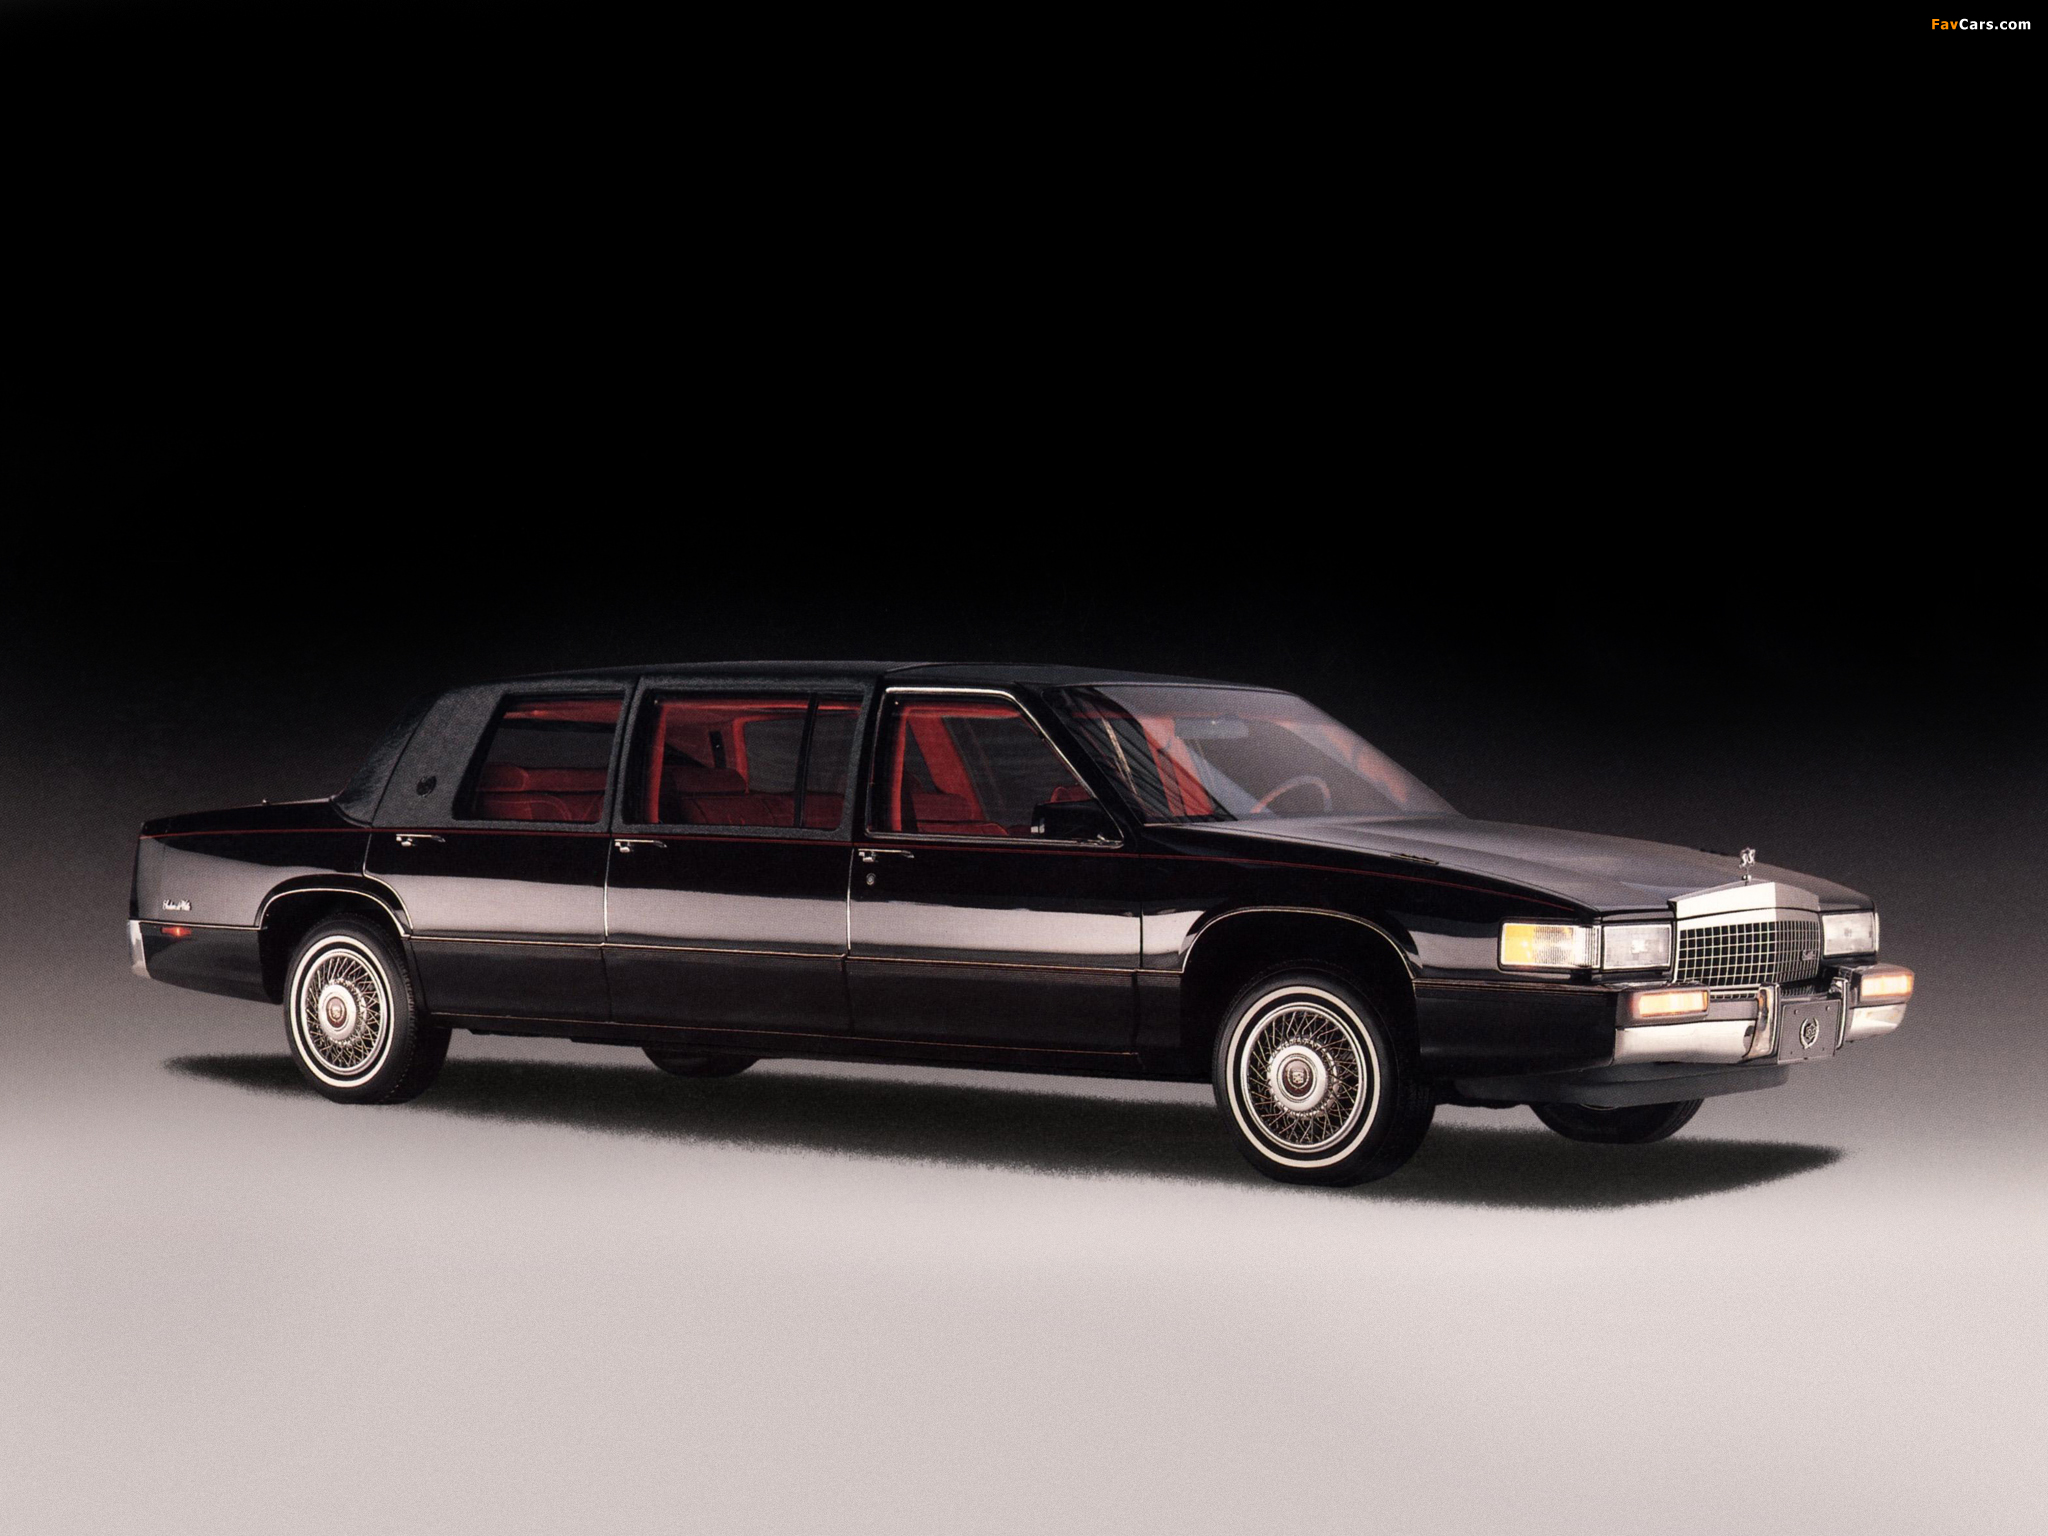 Pictures of Sayers & Scovill Cadillac DeVille Professional Limousine 1992 (2048 x 1536)